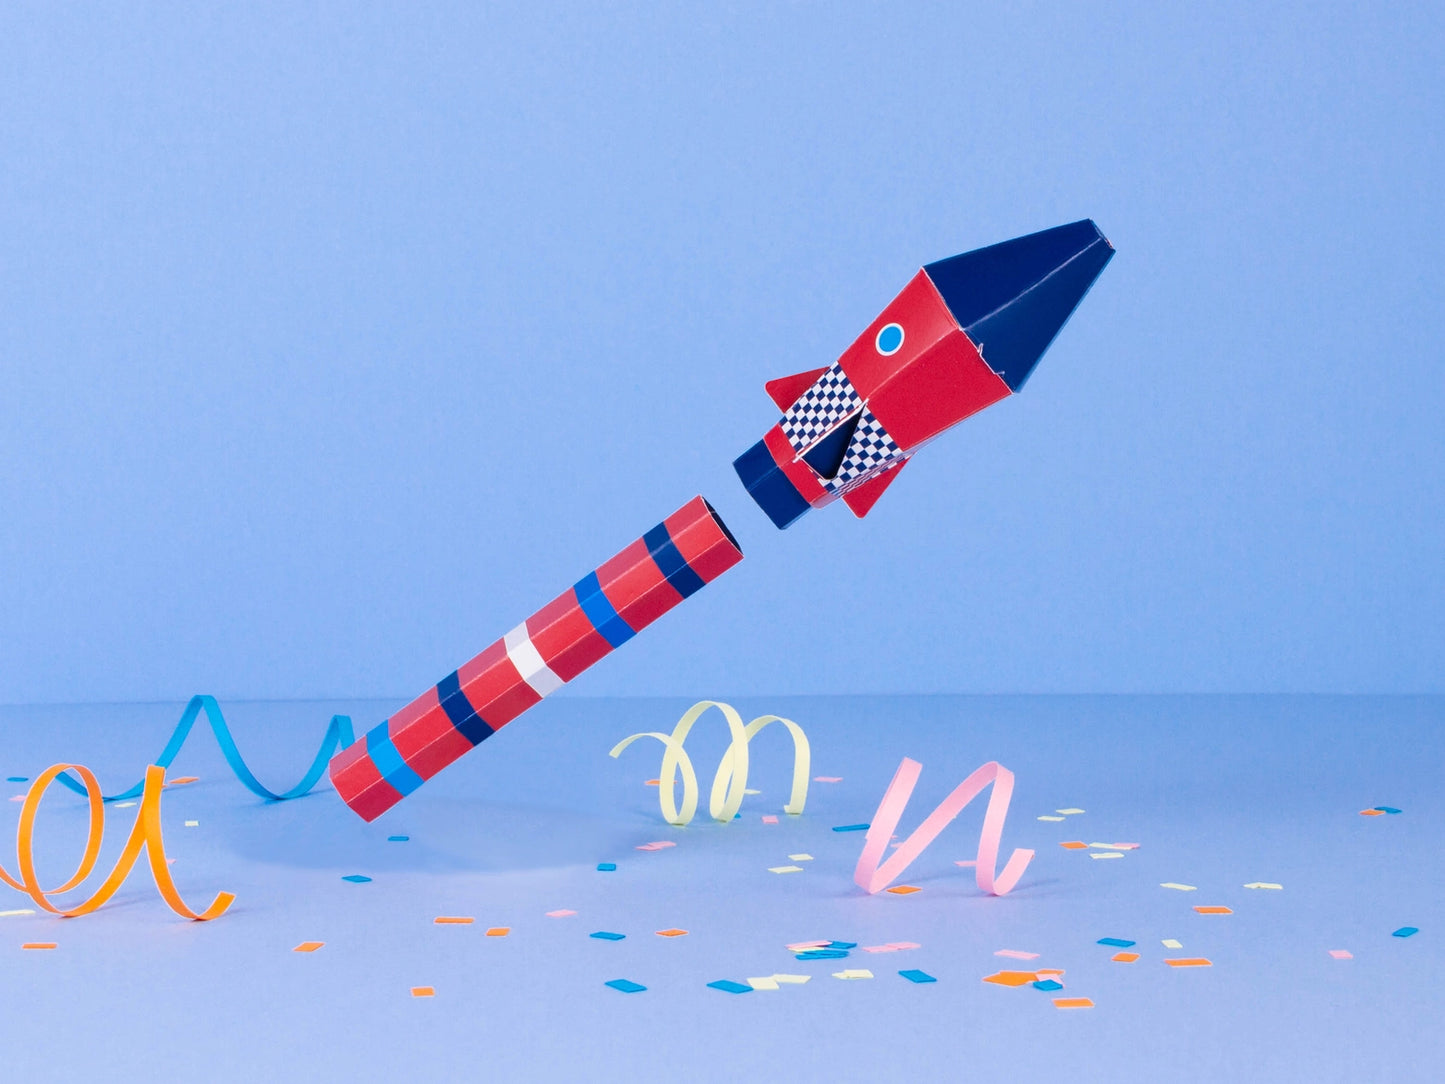 Create Your Own Blow Rocket